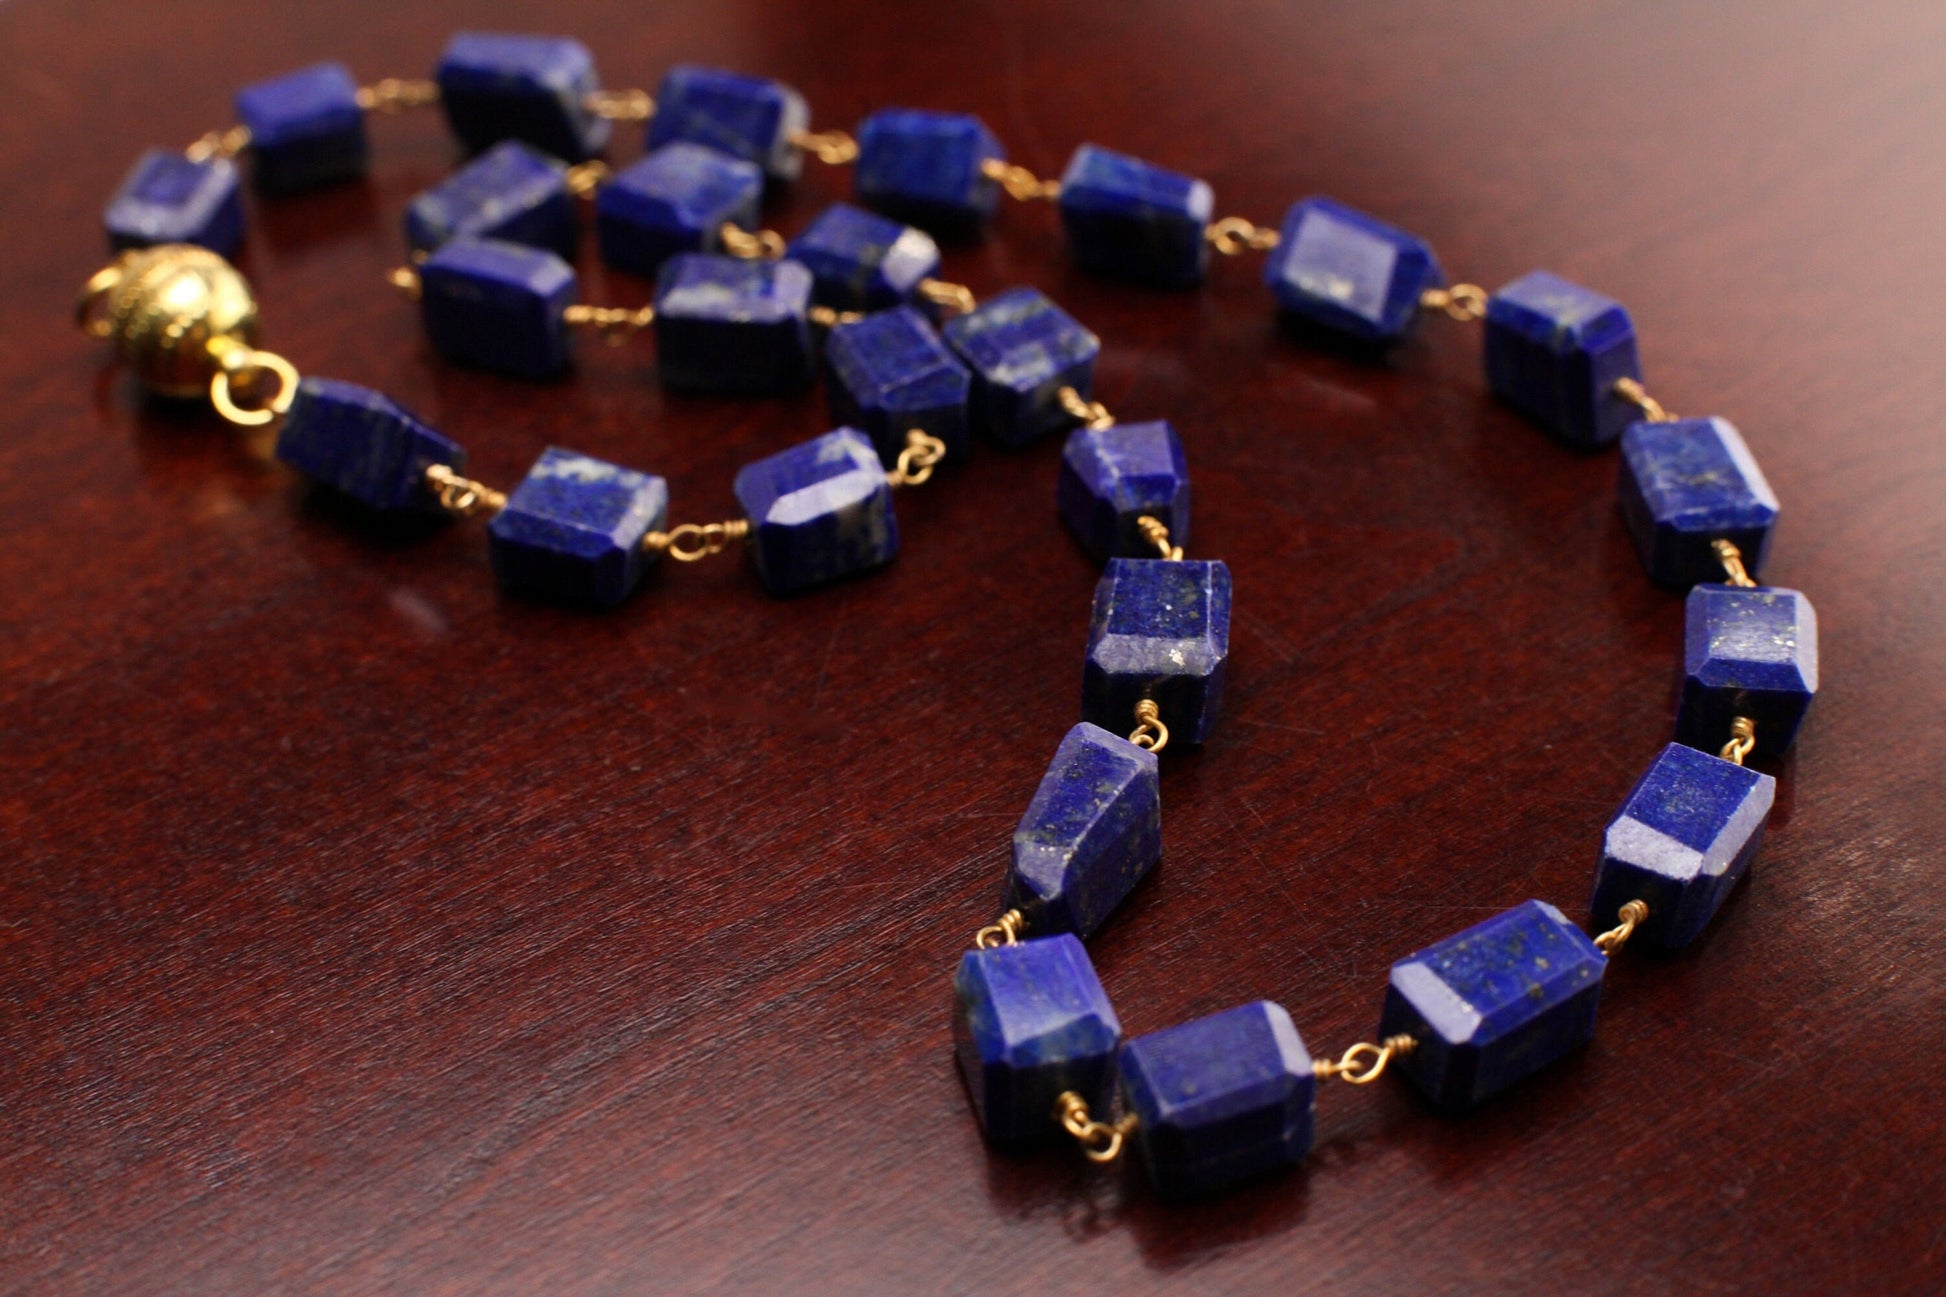 Genuine Lapis Lazuli Free Form Raw Faceted Rectangular 9-12mm Pillars Wire Wrapped gold Necklace Strong Magnetic Clasp,chakra healing gift